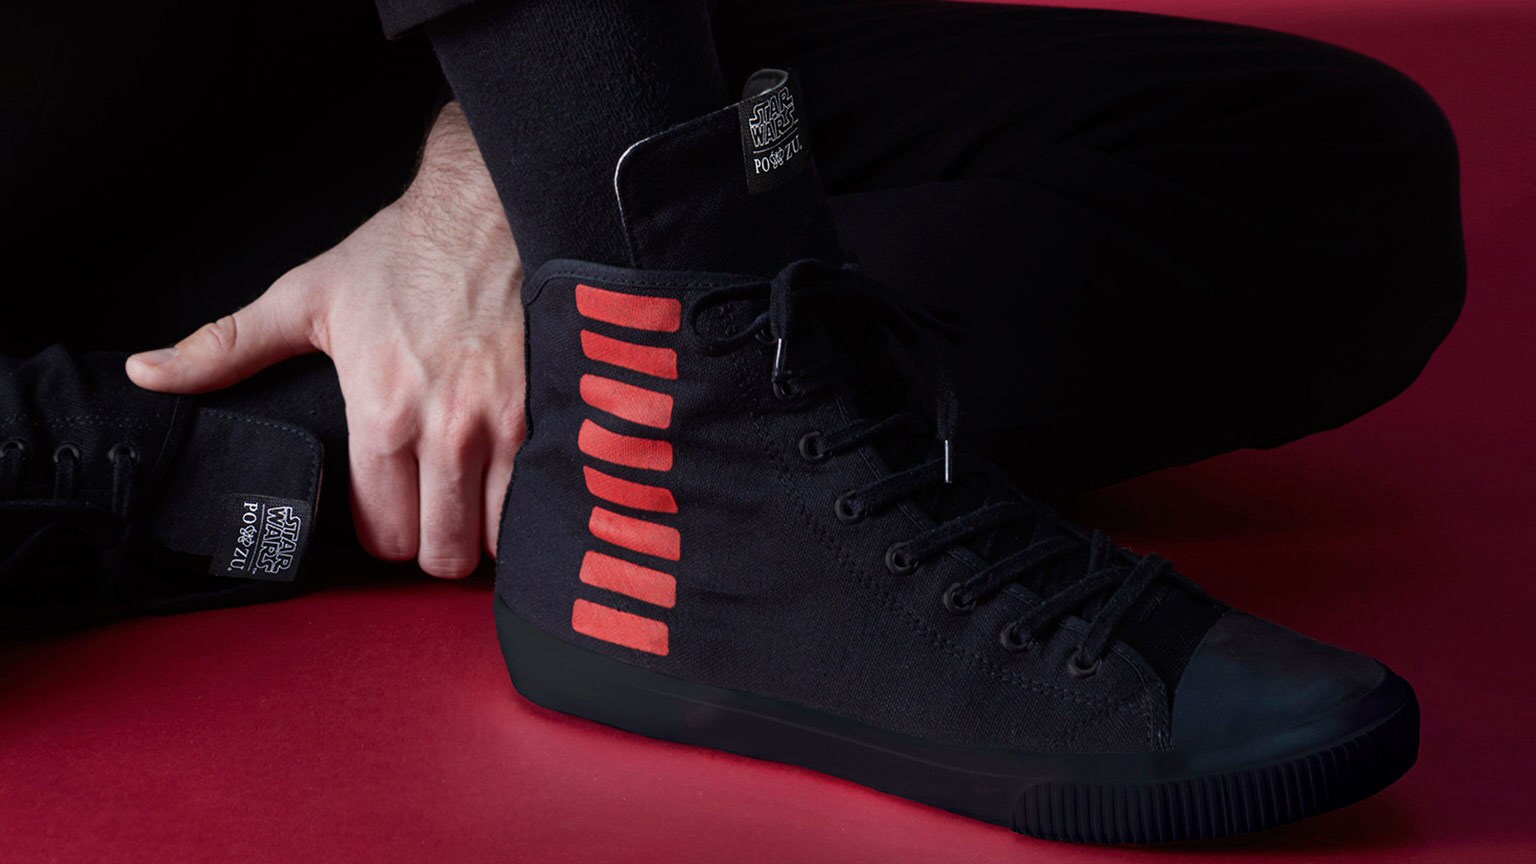 Po-Zu is bringing shoes from a galaxy far, far away to The Big Issue Shop